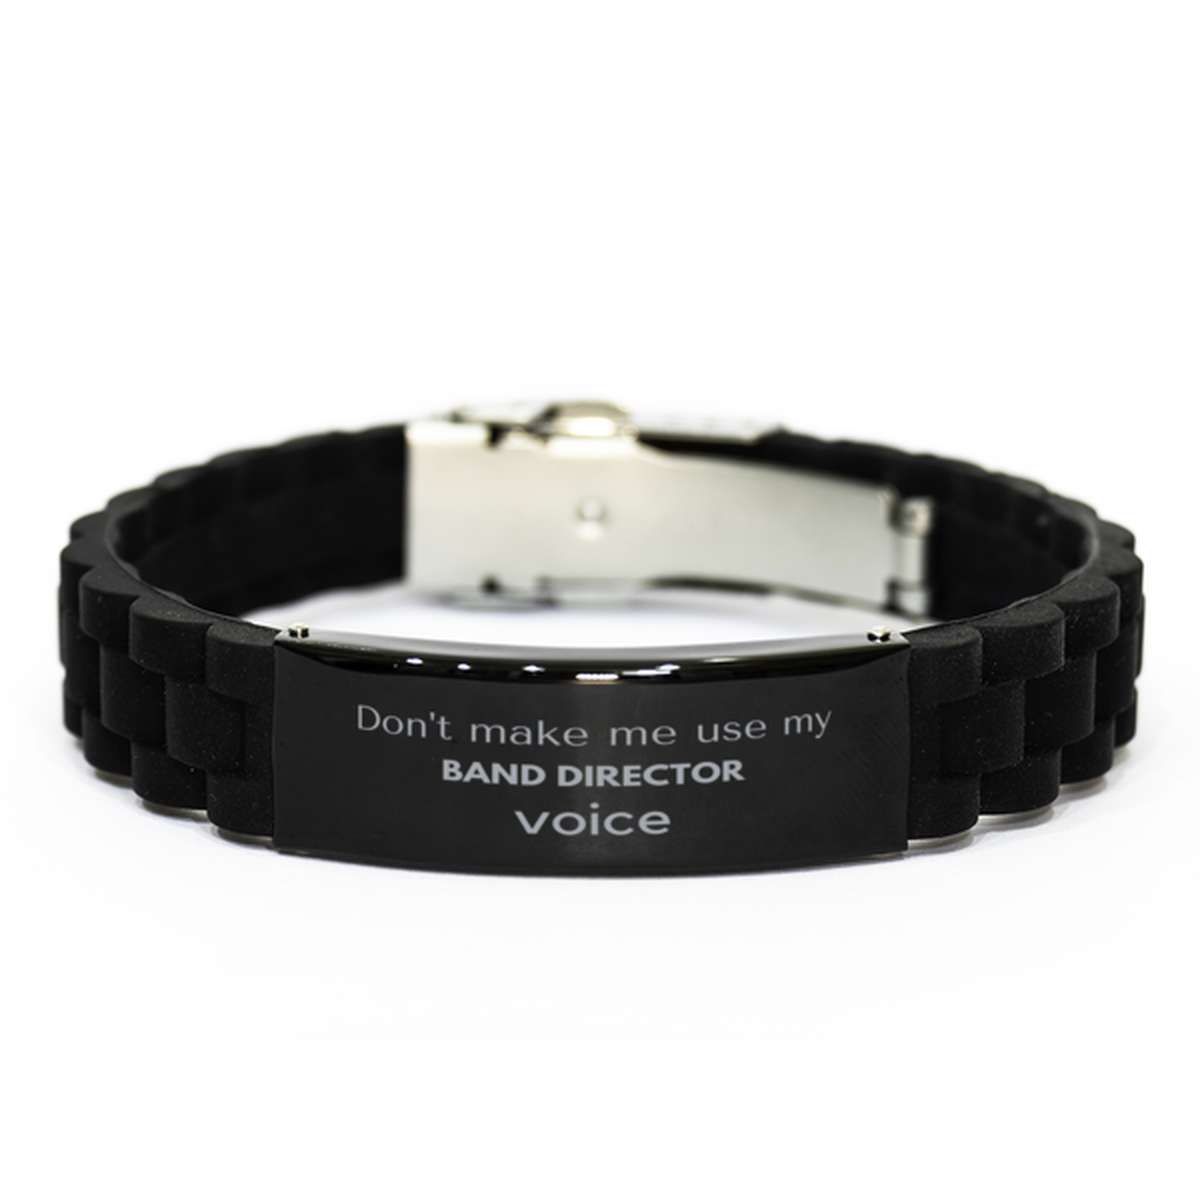 Don't make me use my Band Director voice, Sarcasm Band Director Gifts, Christmas Band Director Black Glidelock Clasp Bracelet Birthday Unique Gifts For Band Director Coworkers, Men, Women, Colleague, Friends